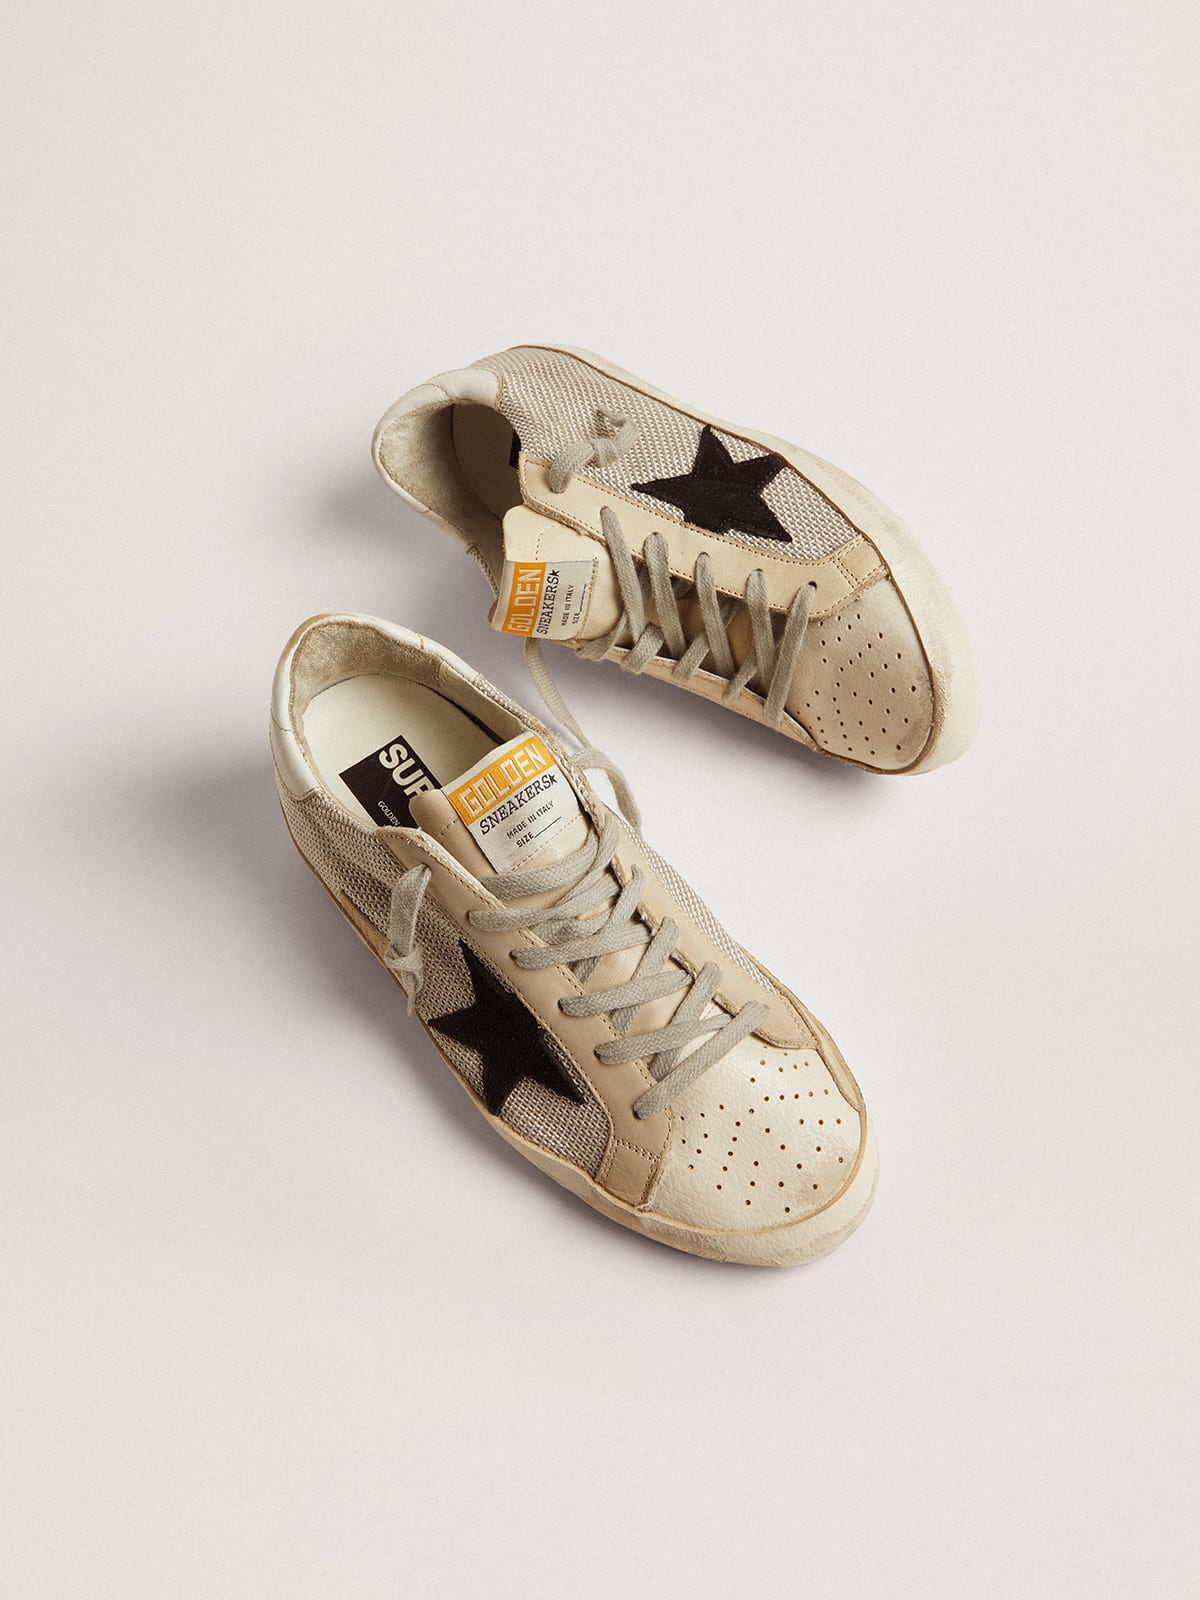 Golden Goose - Women’s Super-Star sneakers in leather with mesh insert in 